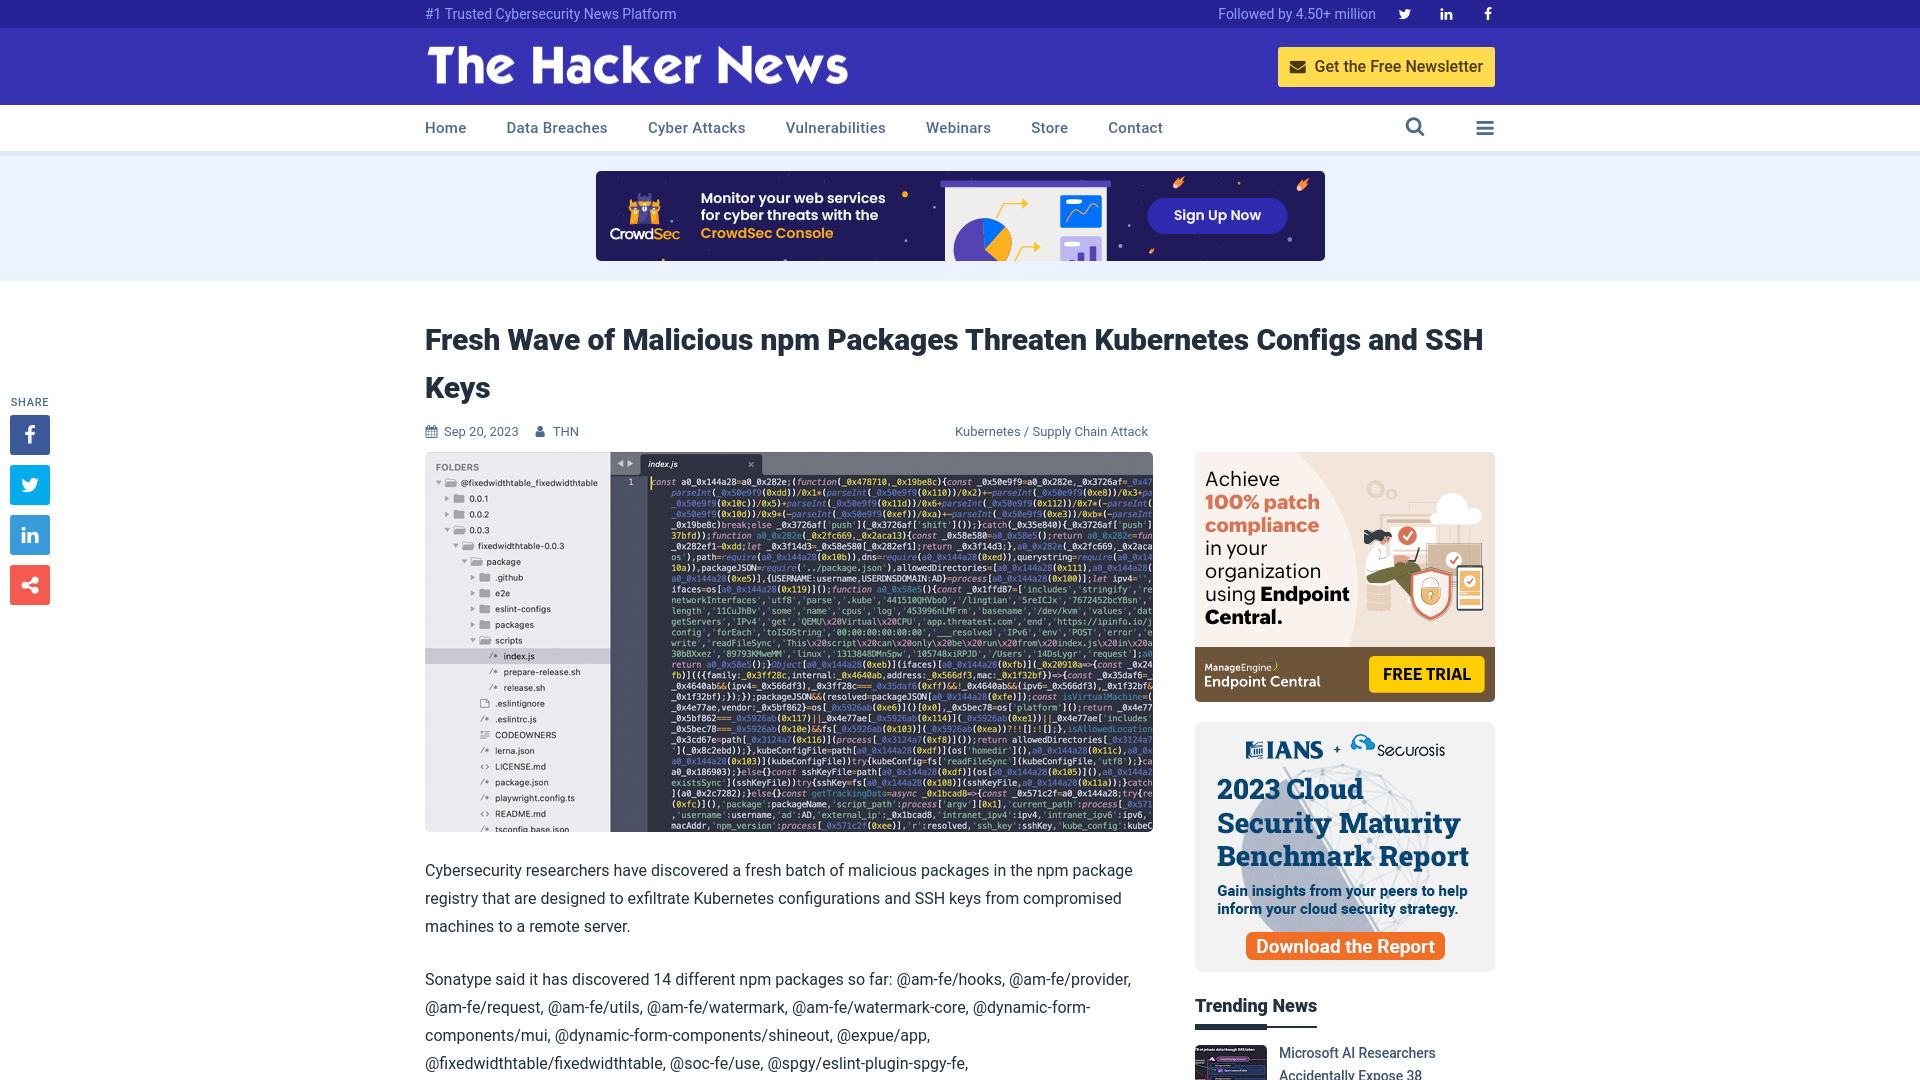 Fresh Wave of Malicious npm Packages Threaten Kubernetes Configs and SSH Keys